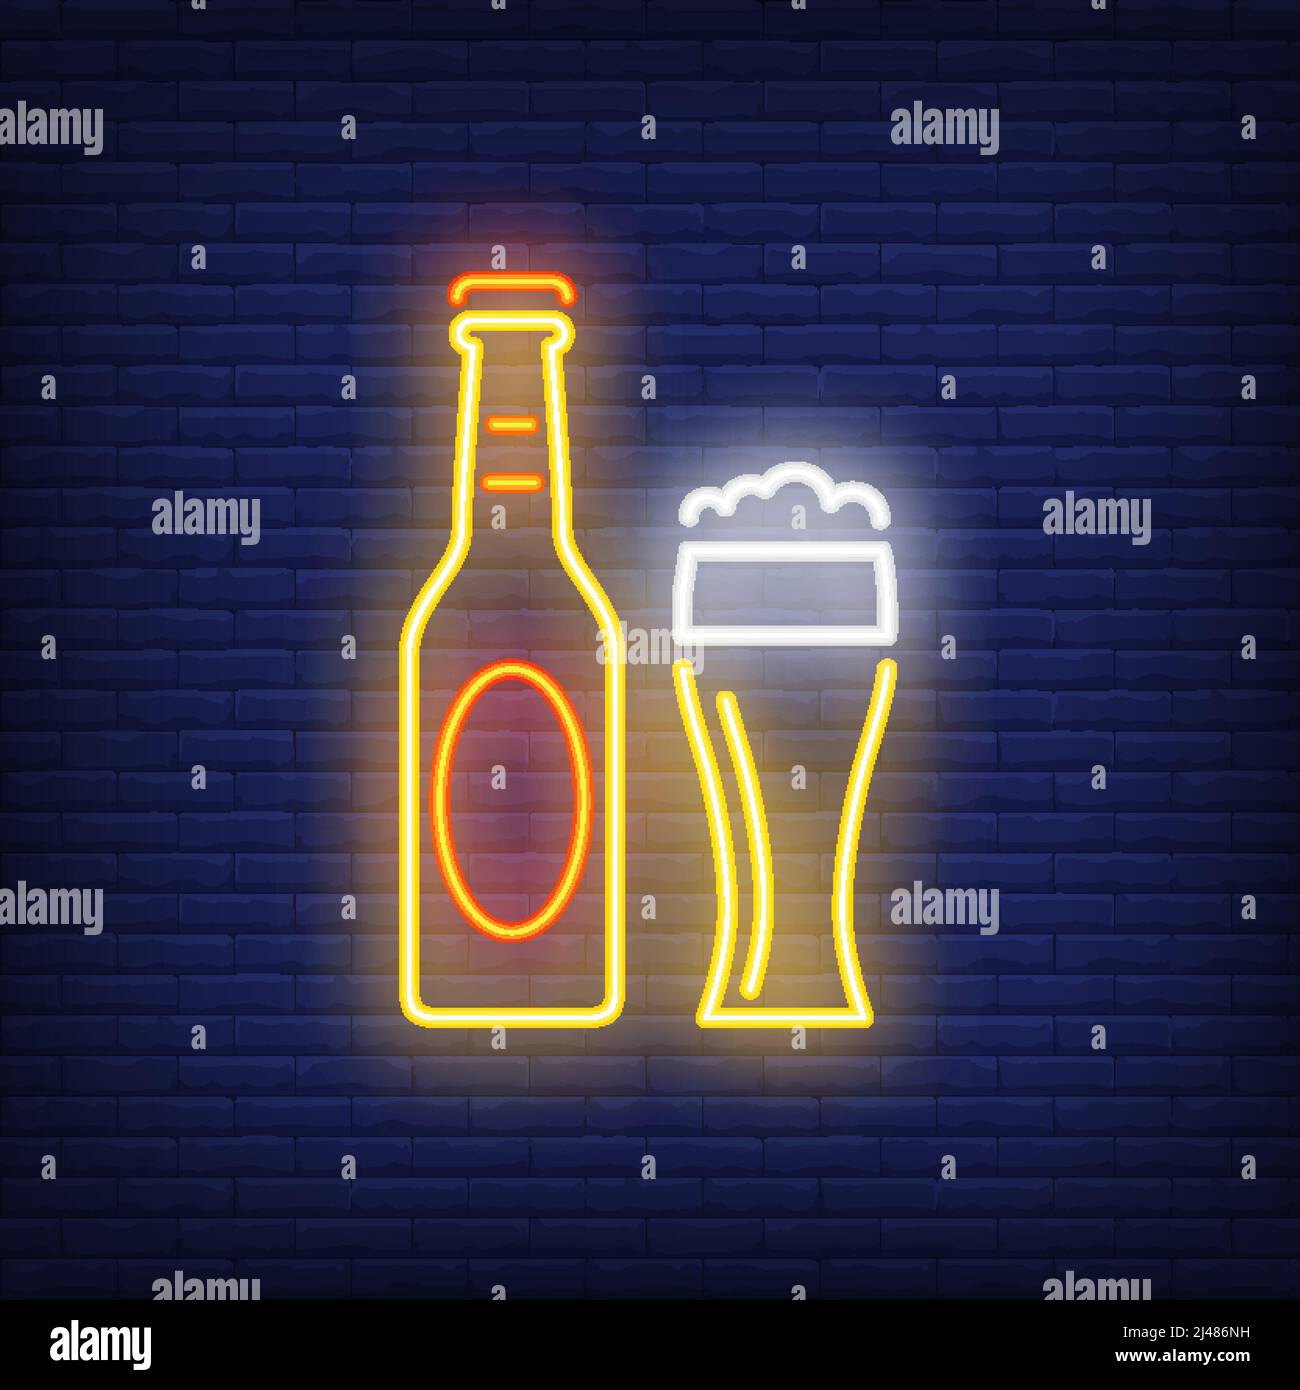 Beer bottle and glass on brick background. Neon style vector illustration. Bar, pub, alcoholic beverages store. Alcohol banner. For advertising, bever Stock Vector